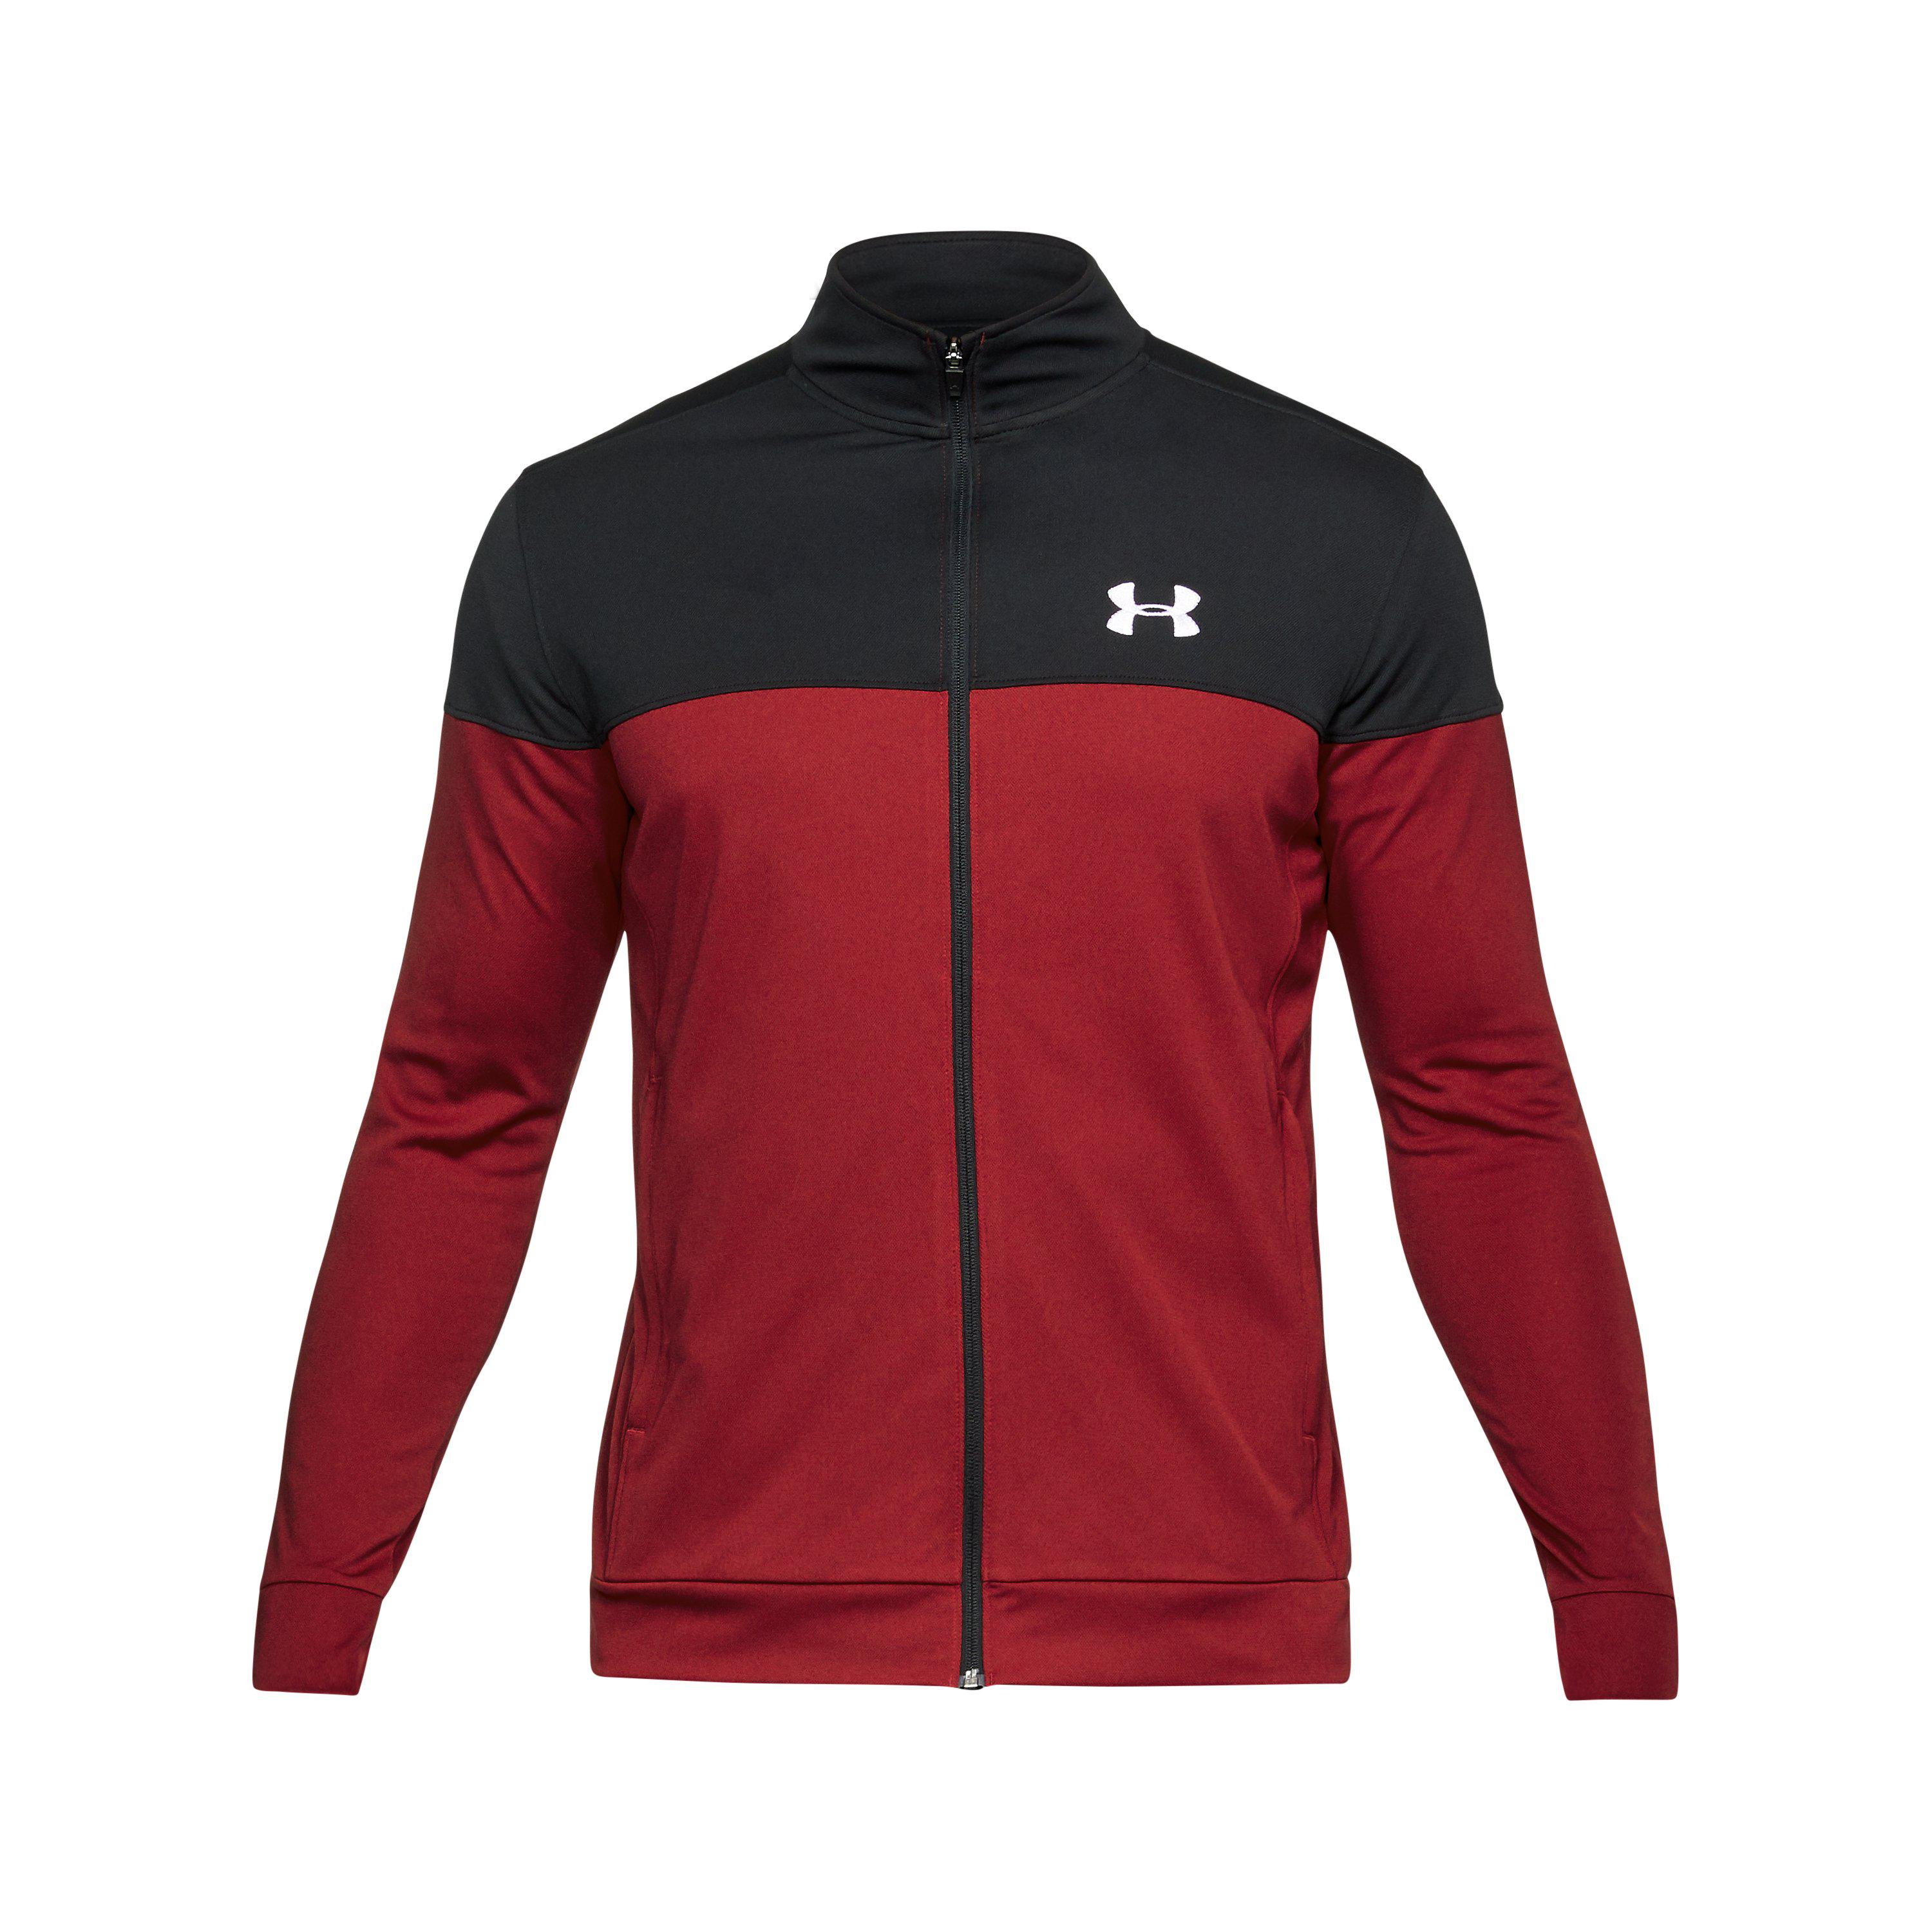 Under Armour Men's Ua Sportstyle Pique Jacket in Red for Men - Lyst